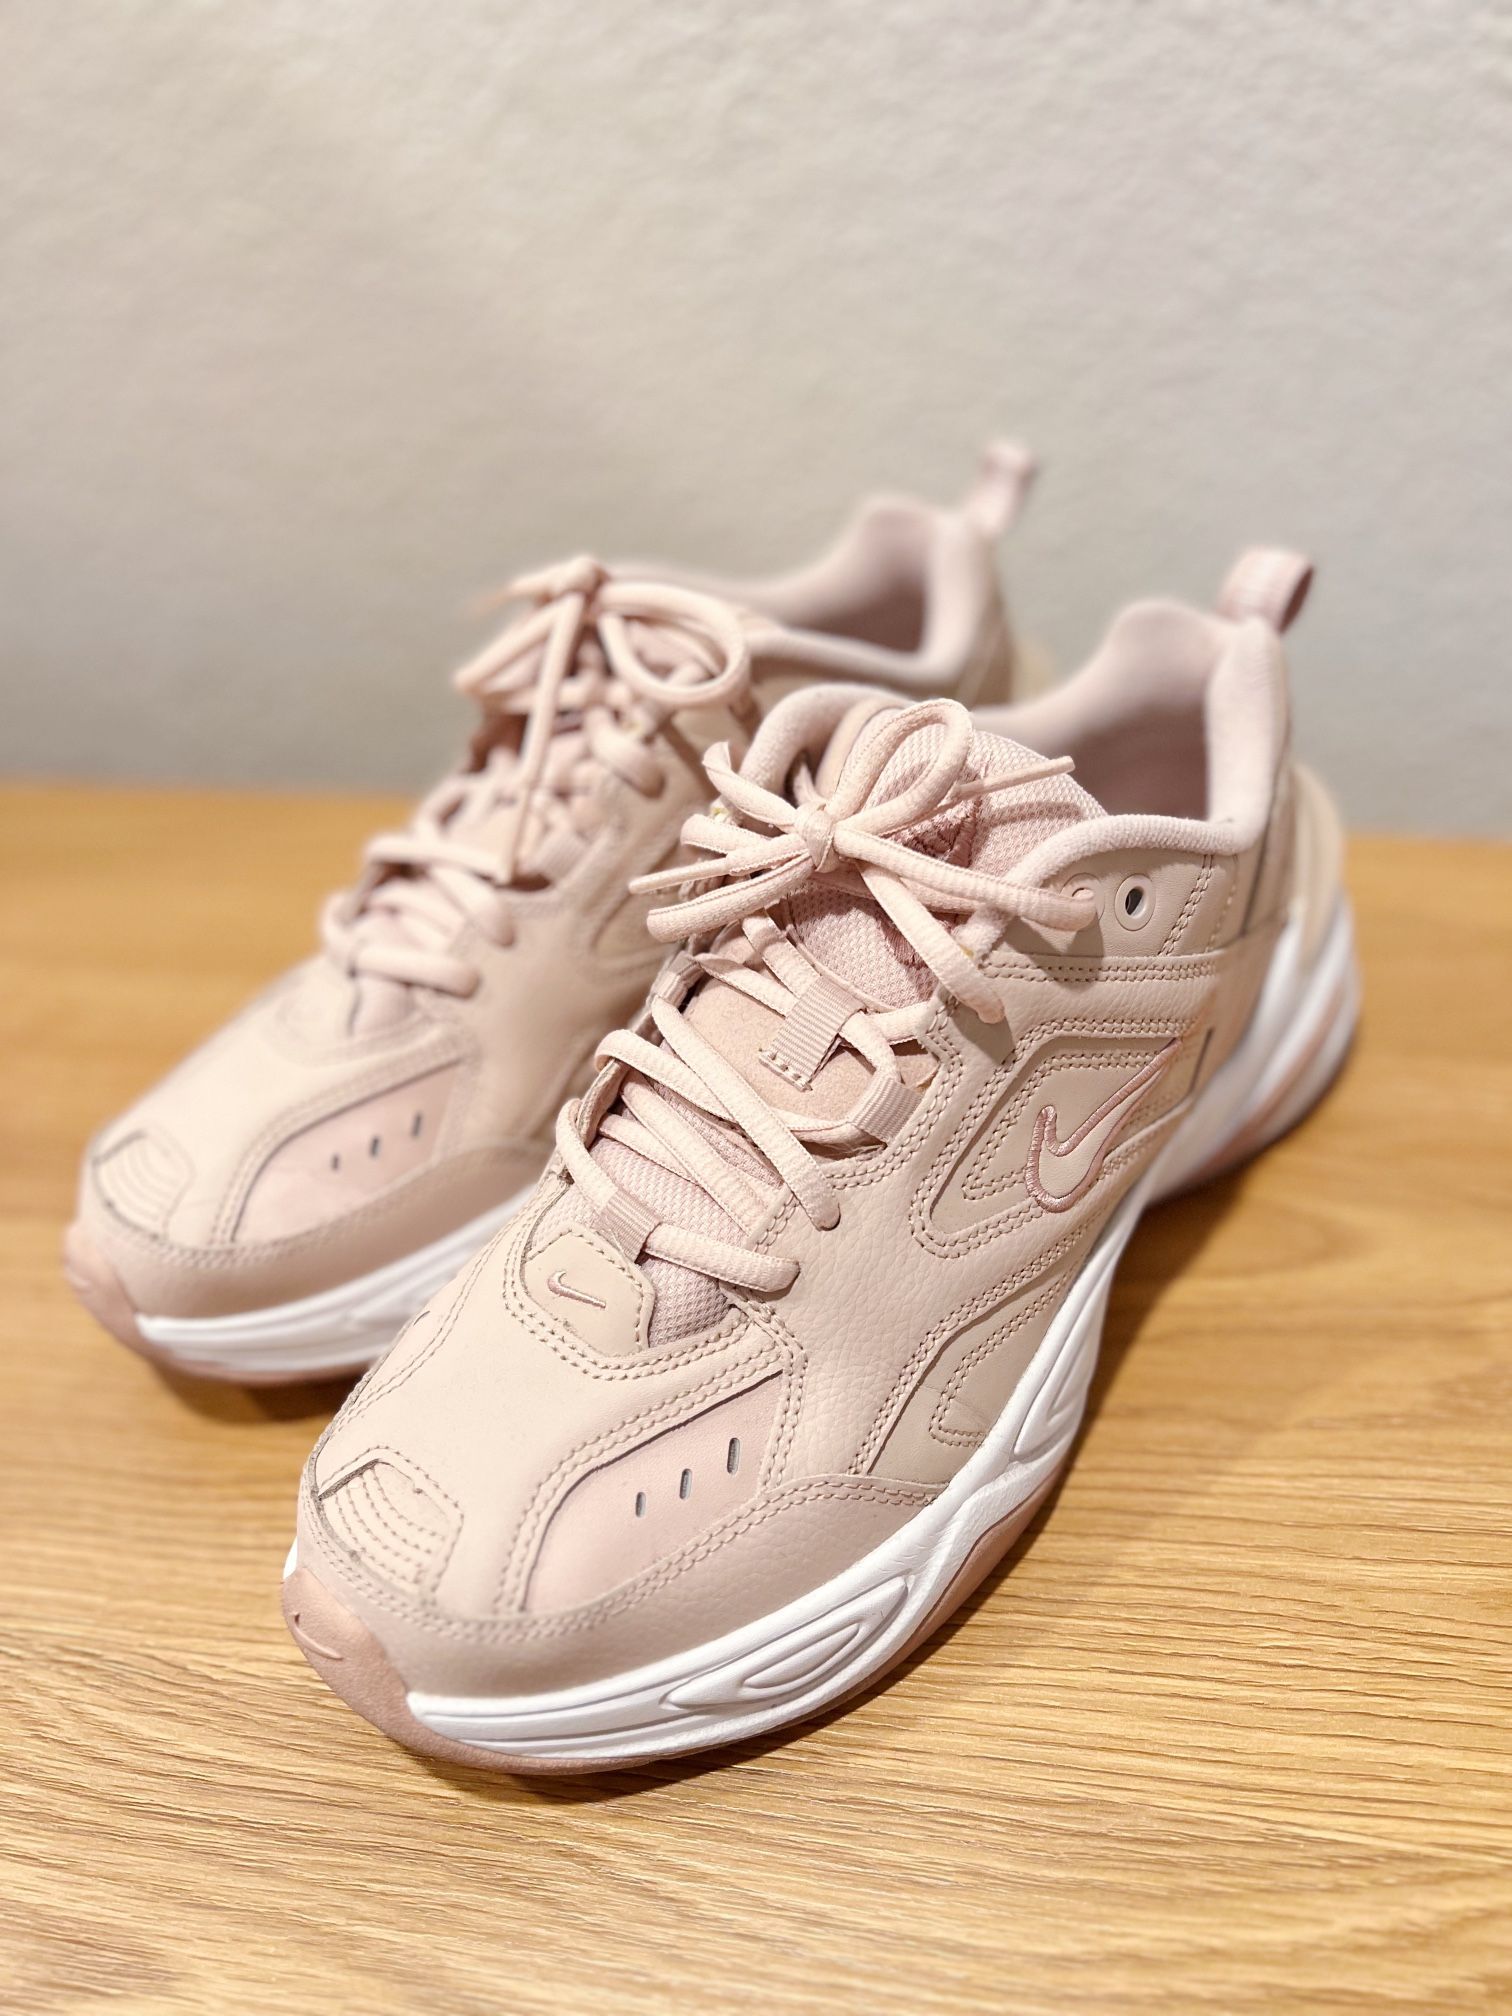 Size 9 - Nike M2K Tekno Particle Beige Brown Women’s Shoes - Great condition